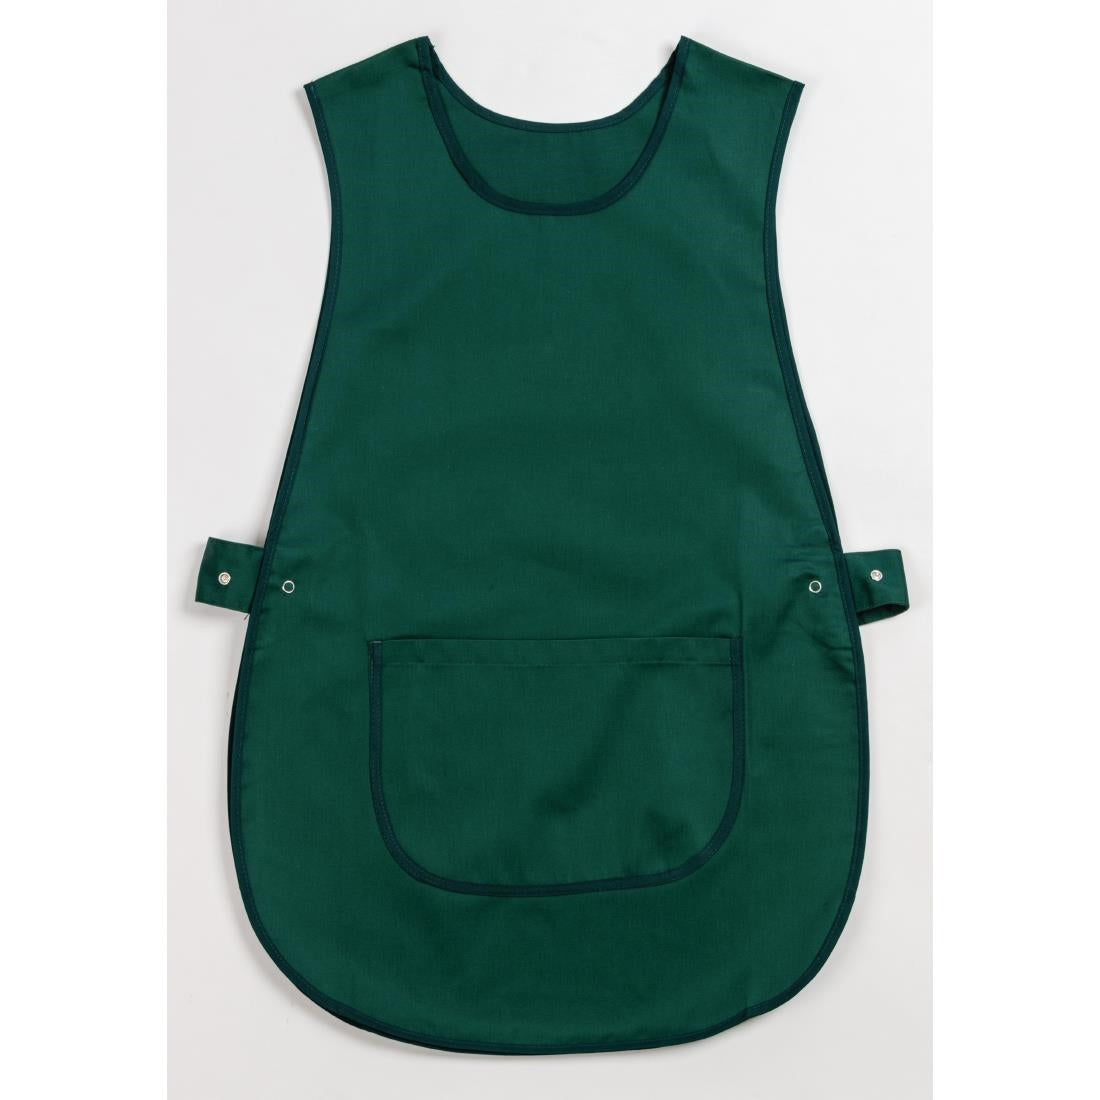 B041 Whites Tabard With Pocket Green JD Catering Equipment Solutions Ltd